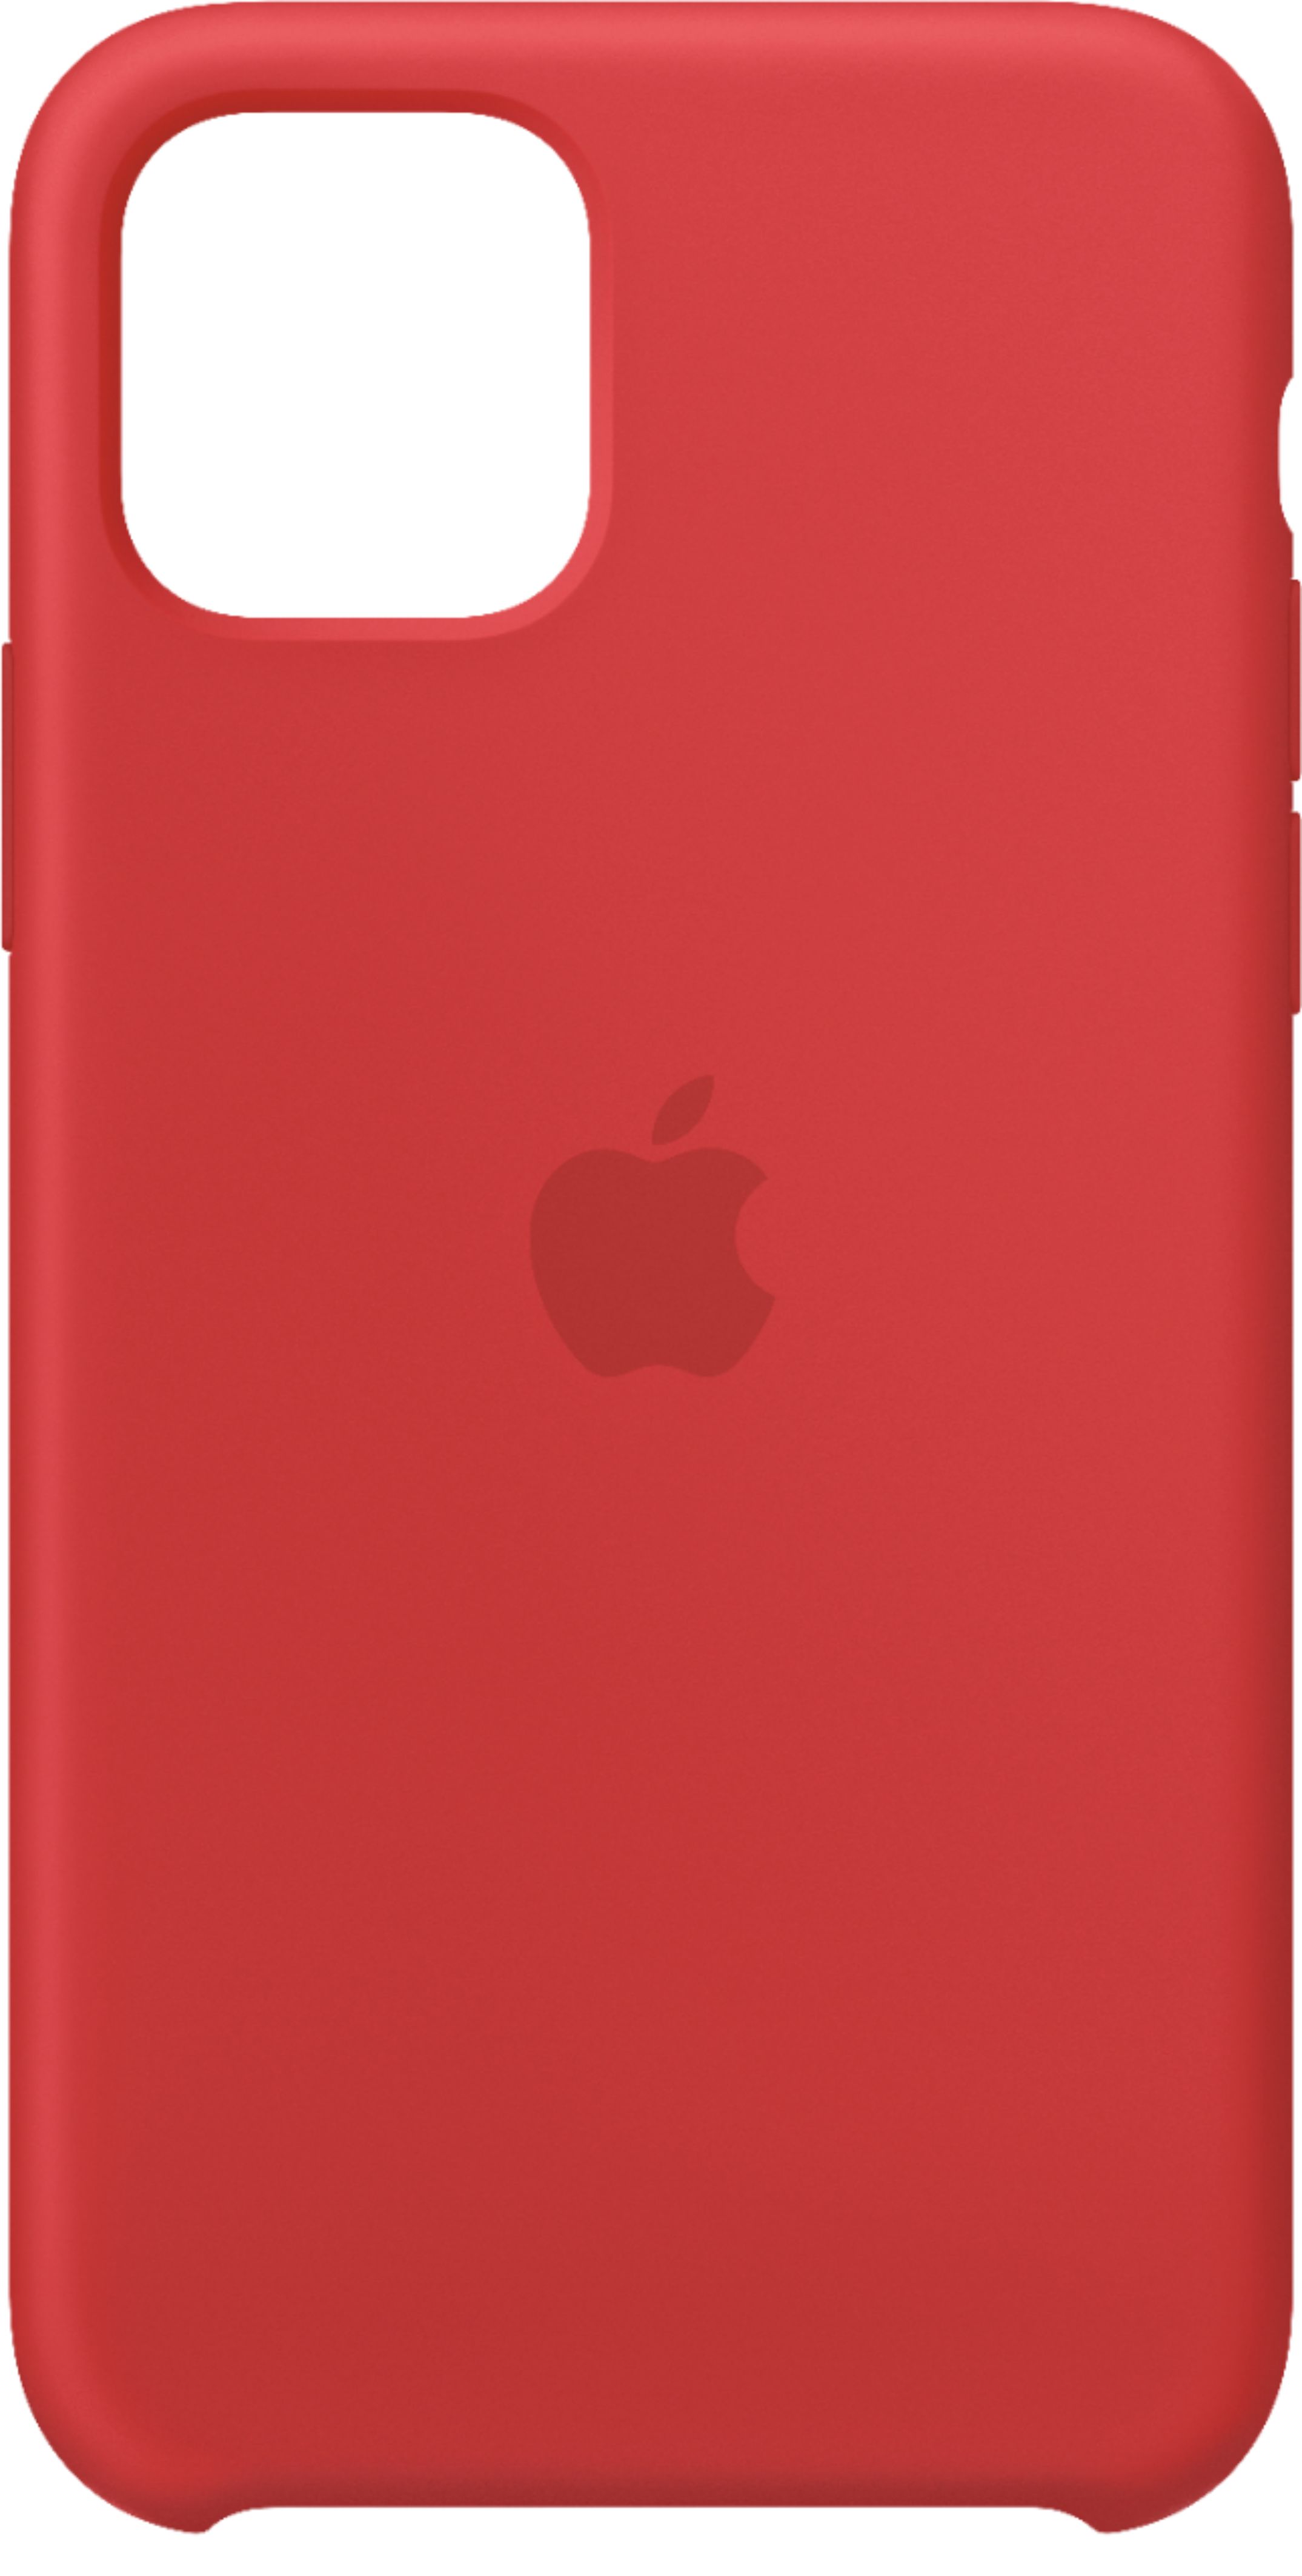 Apple Iphone 11 Pro Silicone Case Product Red Mwyh2zm A Best Buy